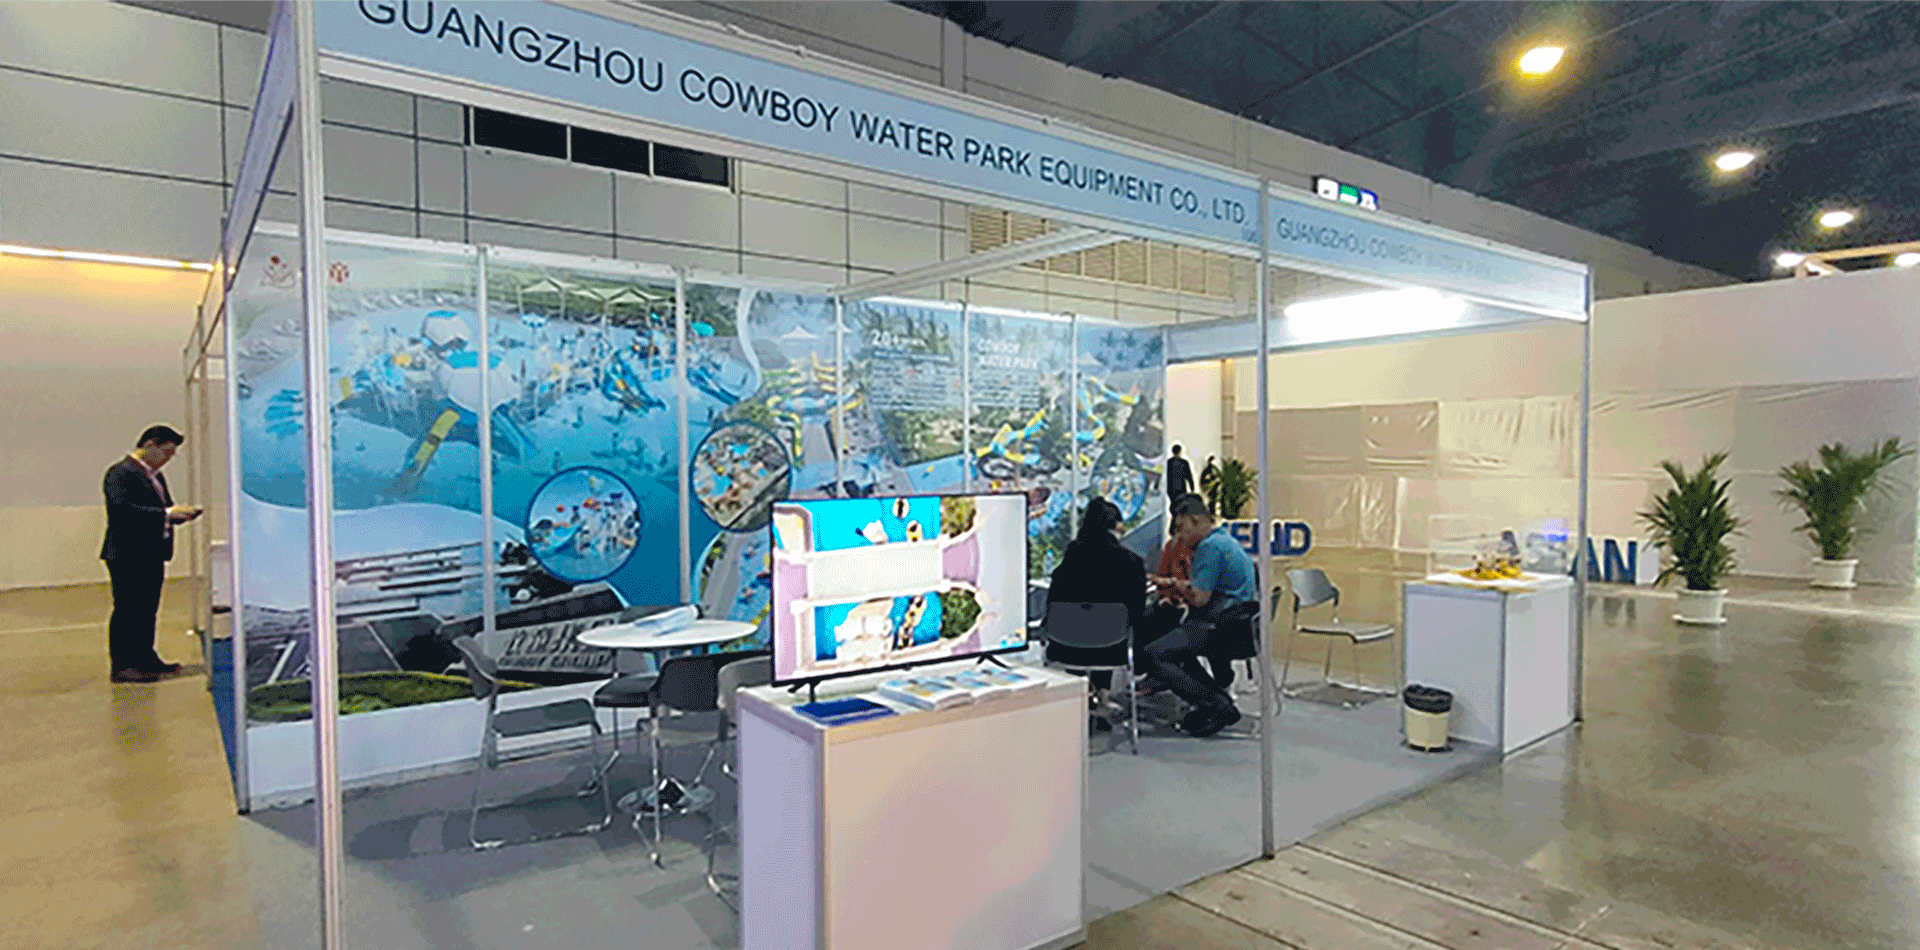 Cowboy Group Further Develops the Southeast Asian Market and Recreates a new Glory at TAAPE Expo